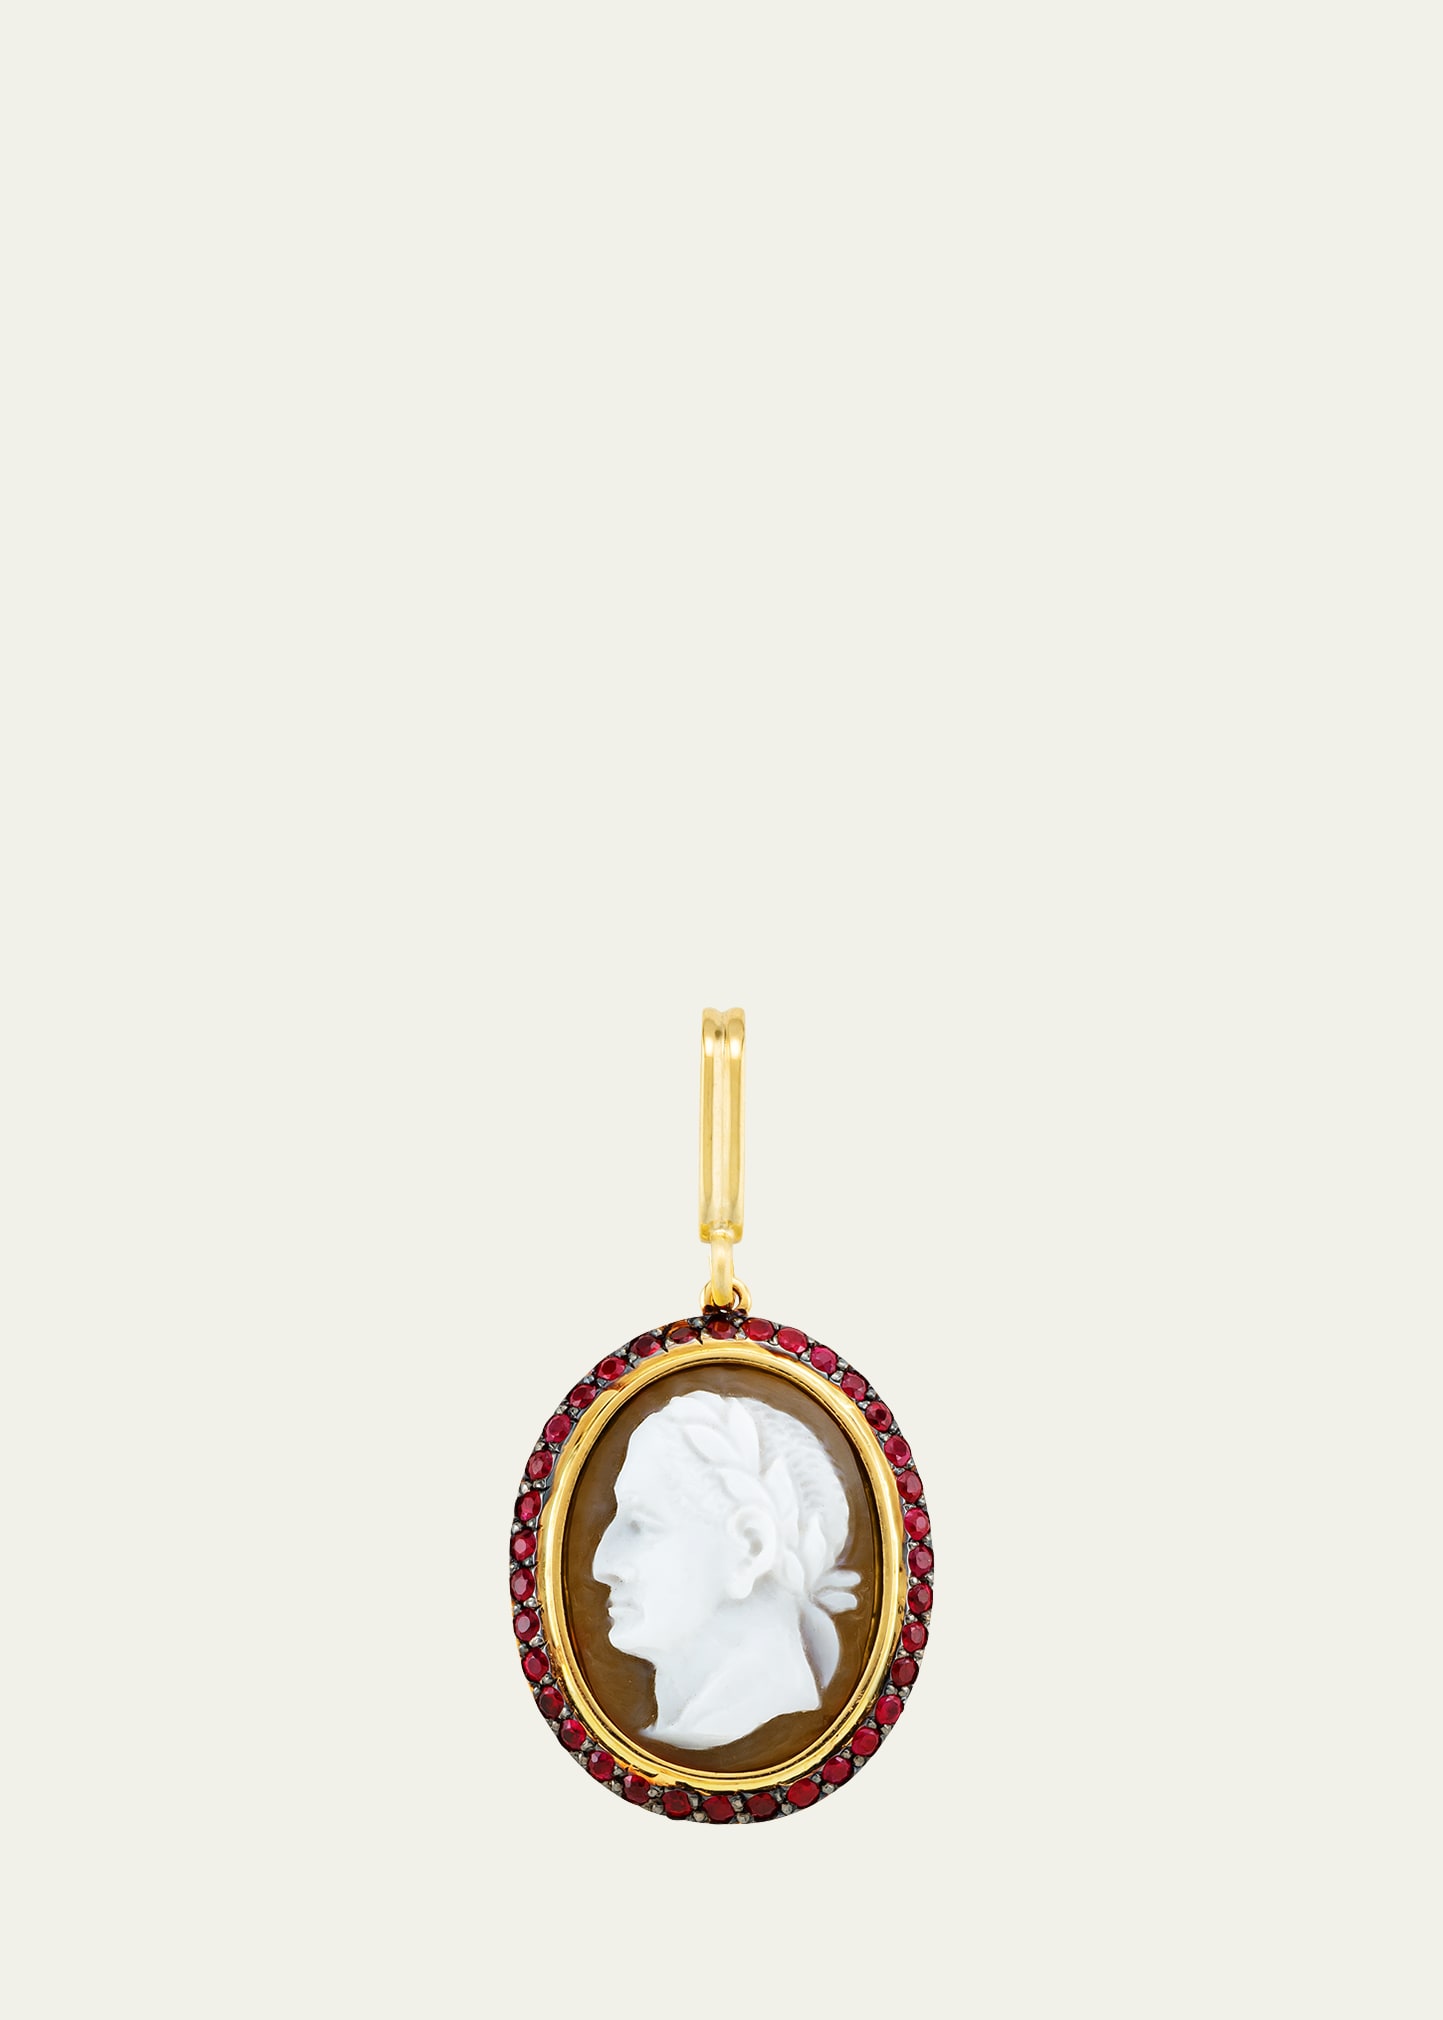 18K Yellow Gold Precious Cameo Charm with Shell and Rubies